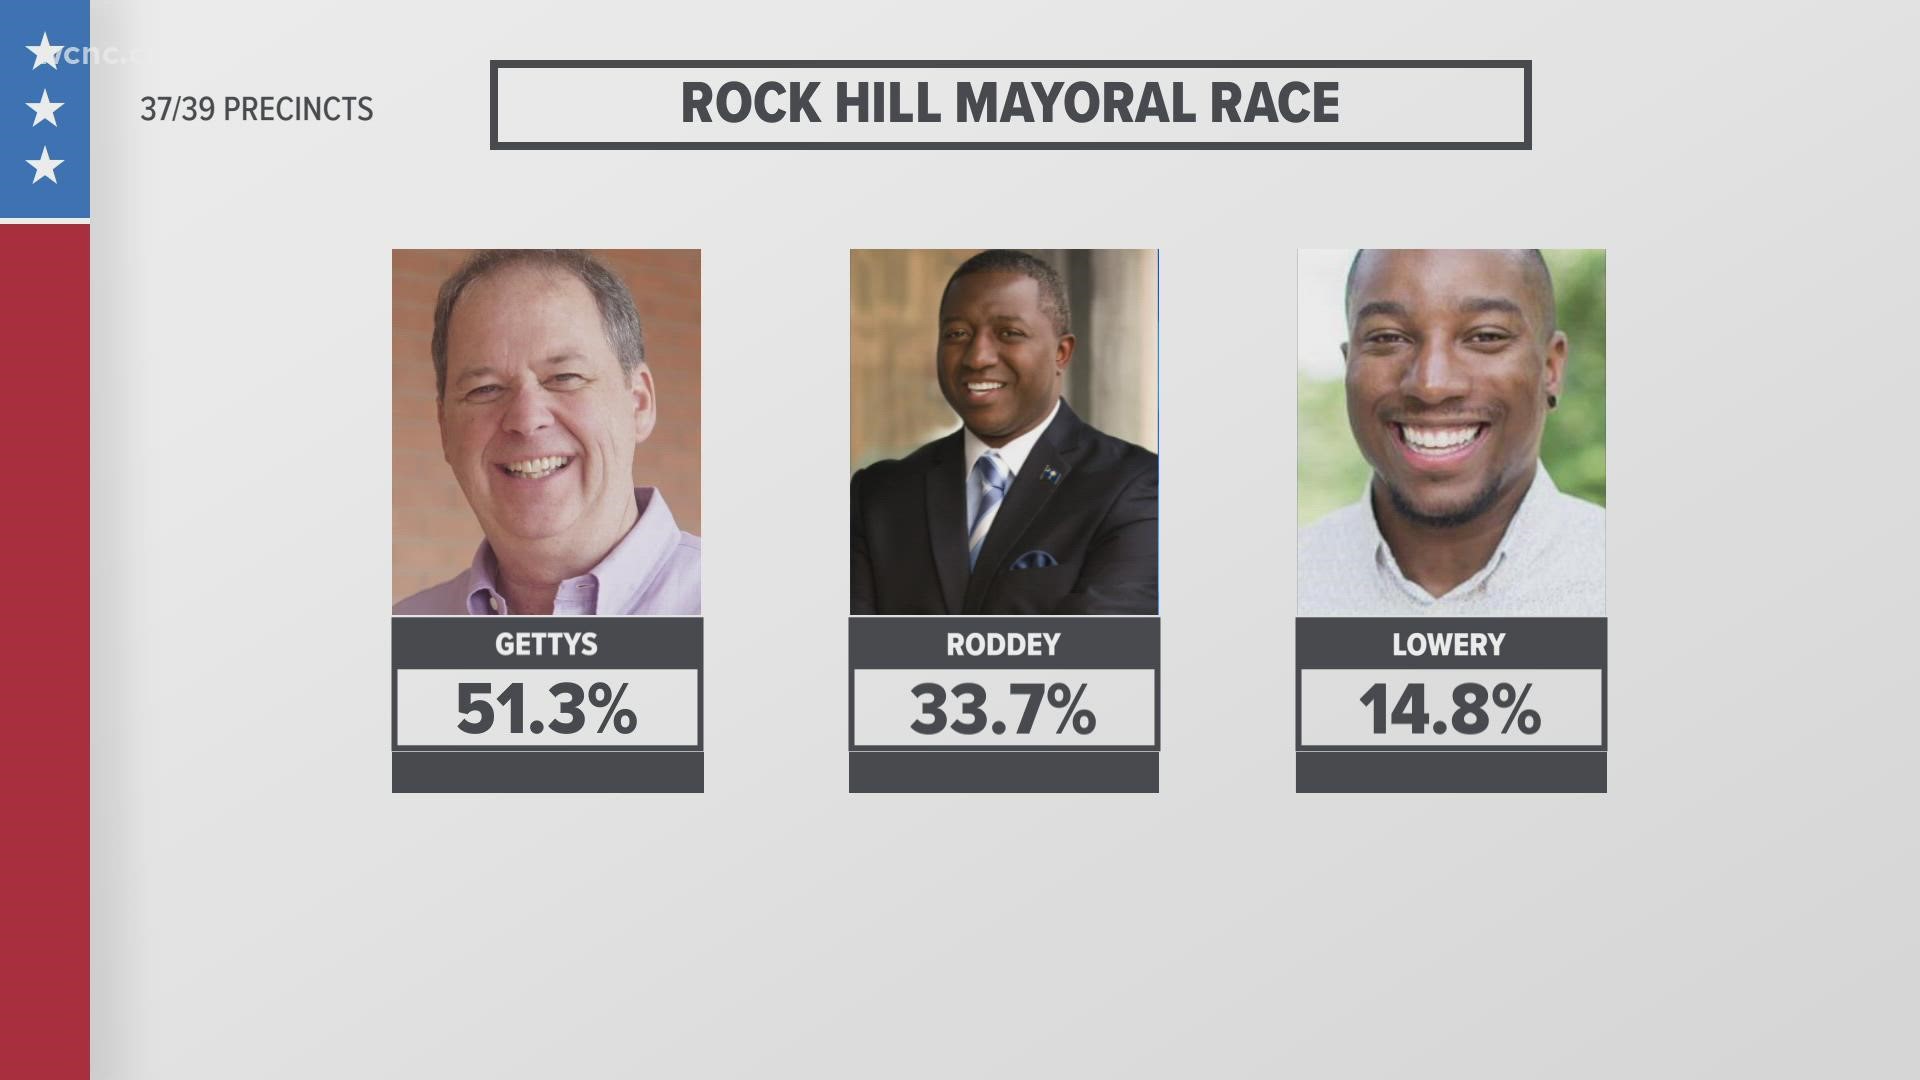 Like other elections across the Carolinas, the Rock Hill mayoral race was pushed back due to delayed census data.